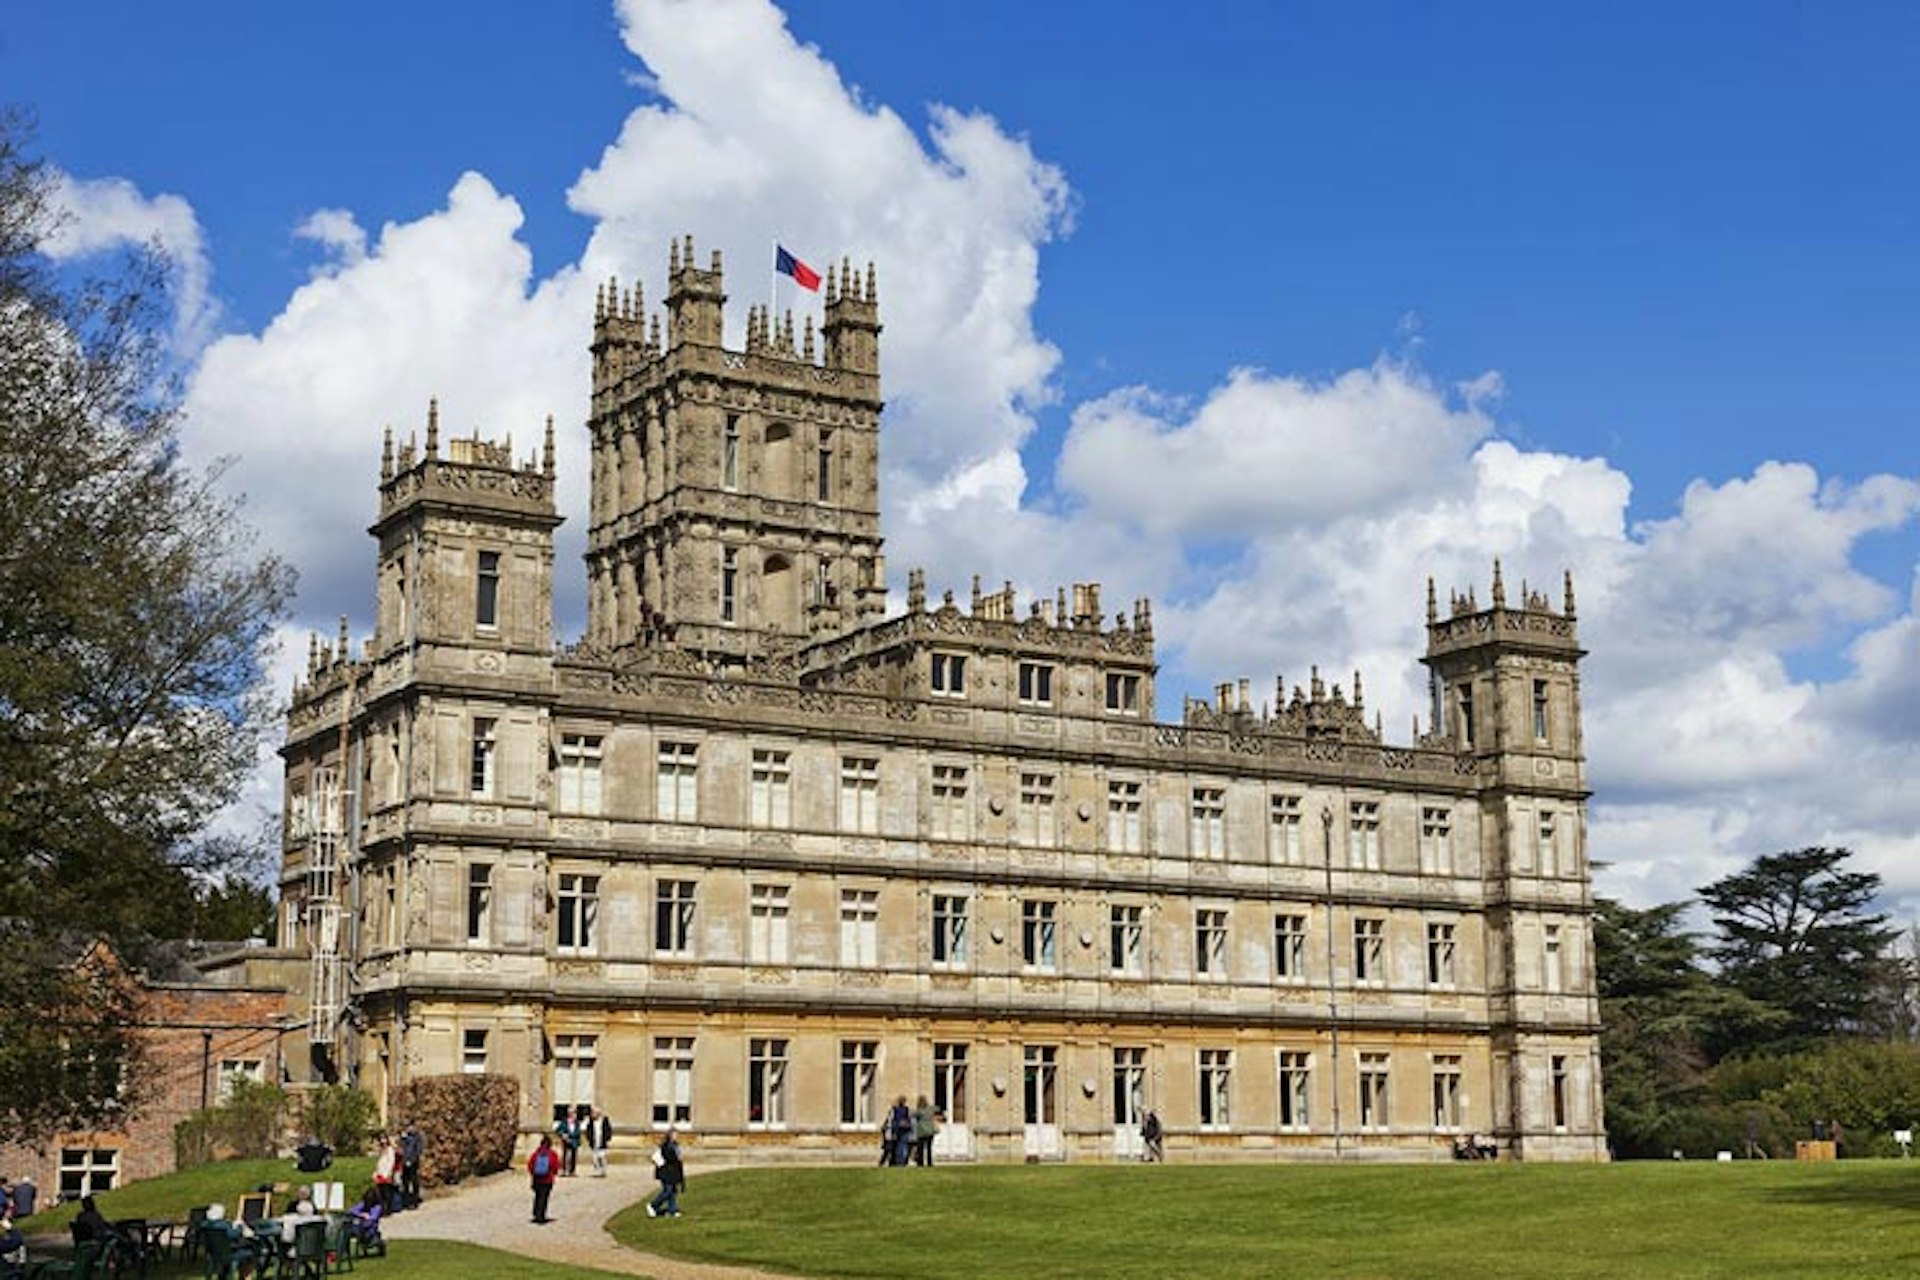 Spot of tea and scandal? Live it up in England's Highclere Castle, better known as Downton Abbey. Image by Eurasia Press / Photononstop / Getty Images